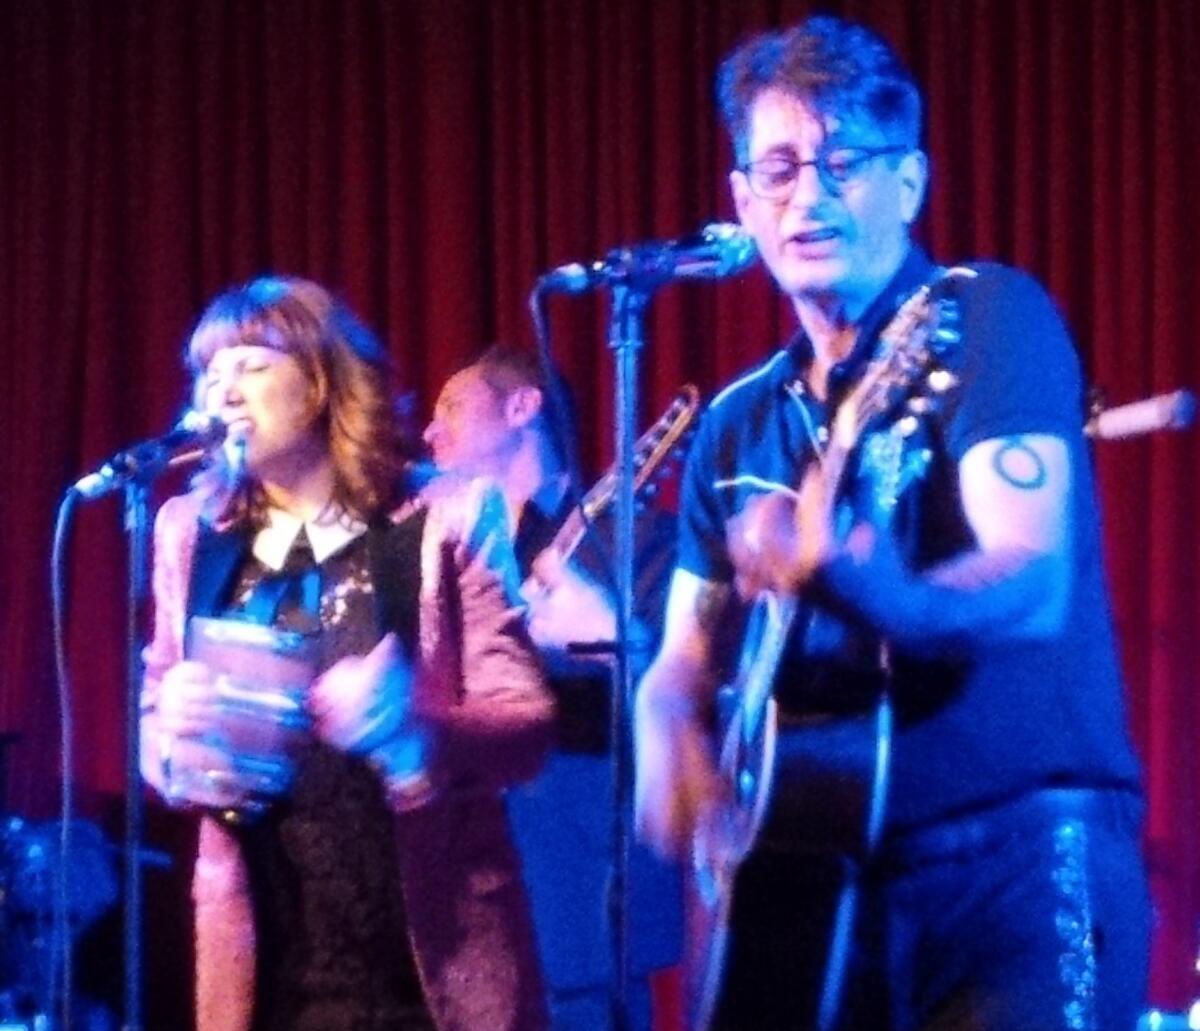 Cindy Wasserman, left, and Frank Lee Drennen of L.A.'s Dead Rock West salute the songs and vocal harmonies of Phil and Don Everly in their new album "It's Everly Time!" The album was released Friday.